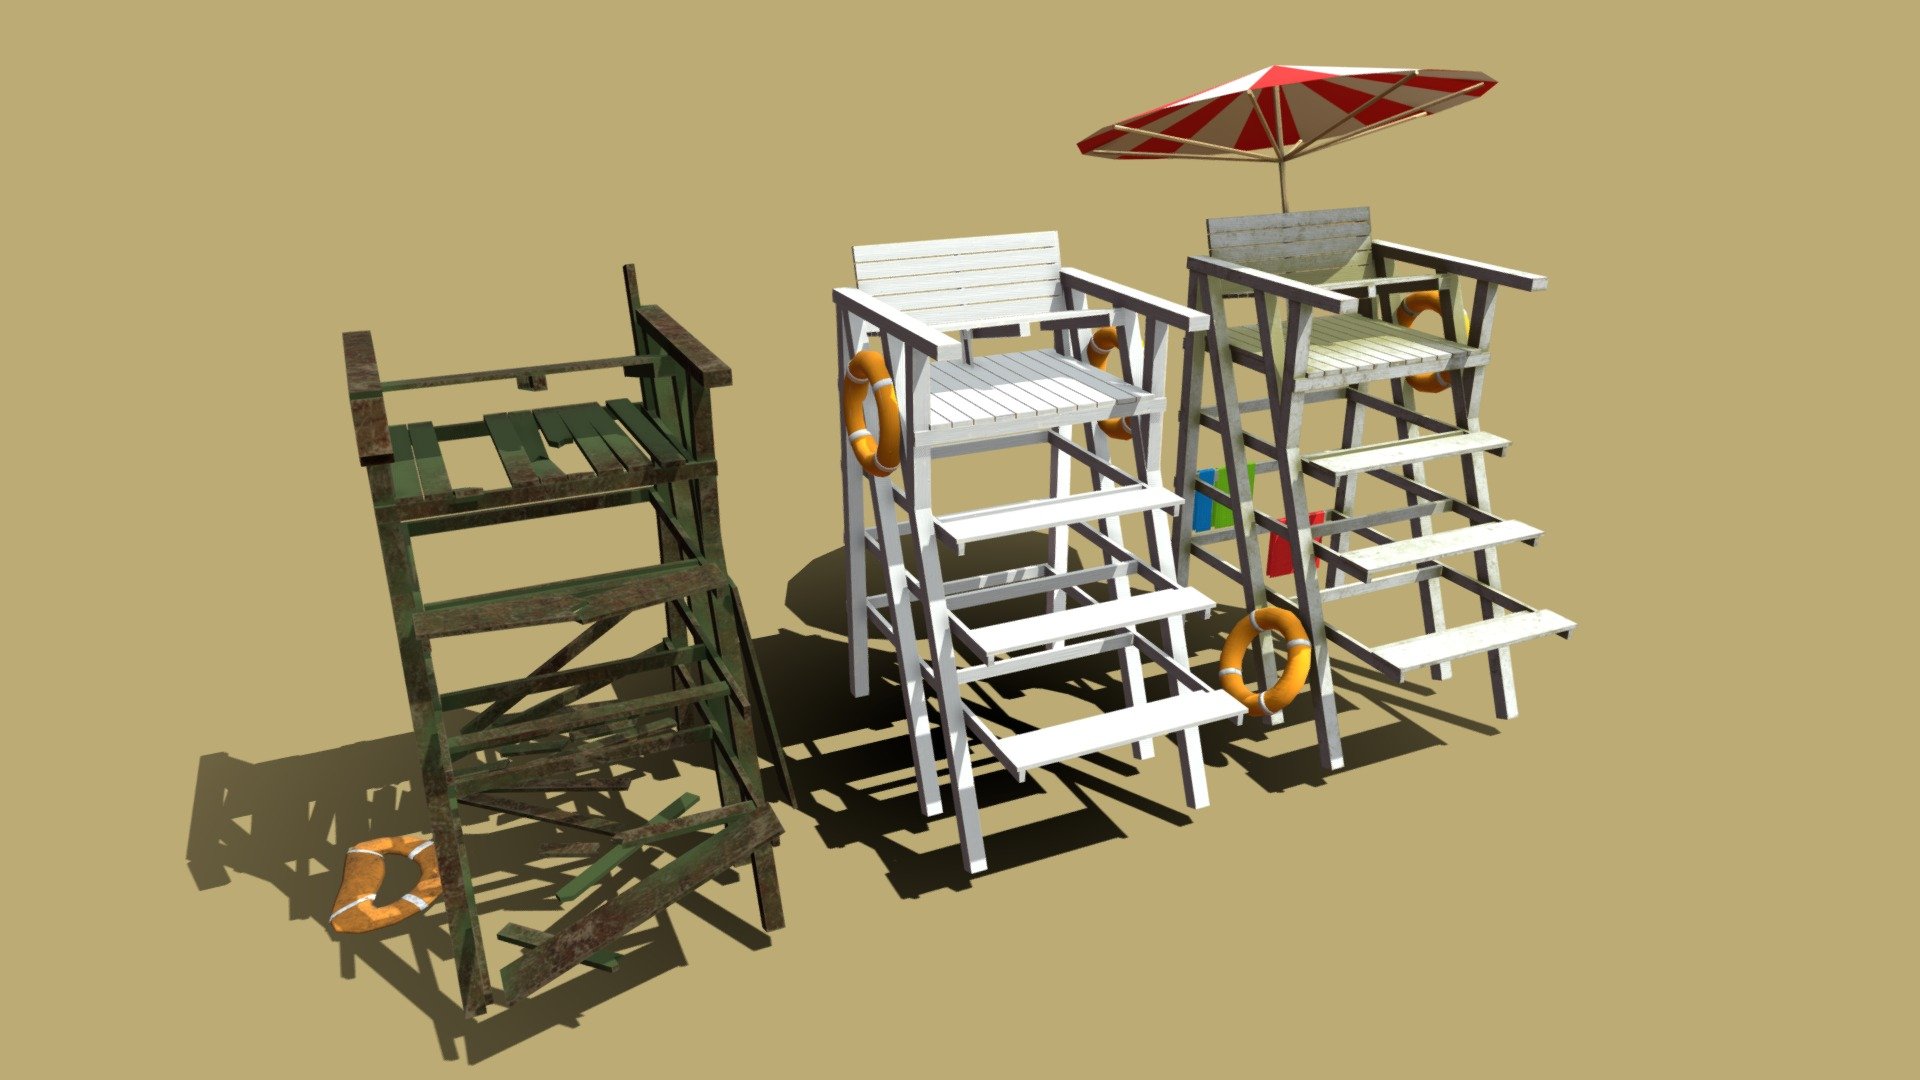 Different lifeguard states for comparison - Lifeguard - 3D model by siraniks 3d model